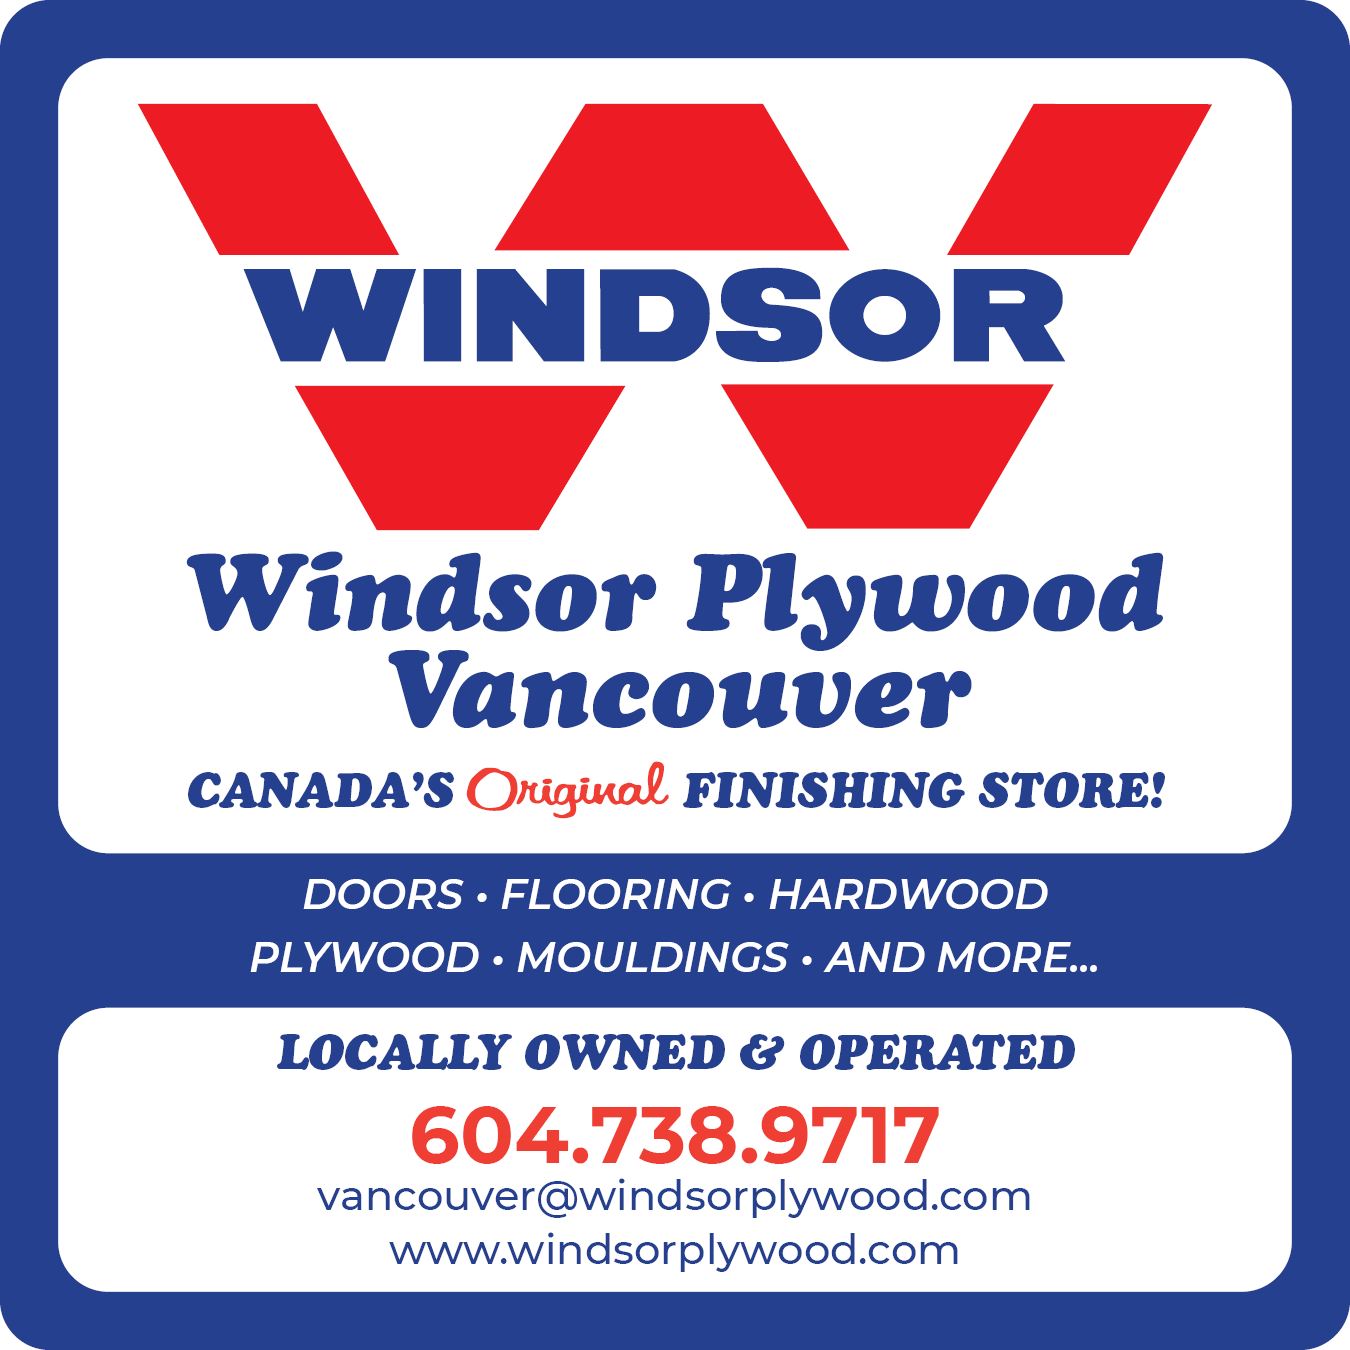 Windsor Plywood - Vancouver